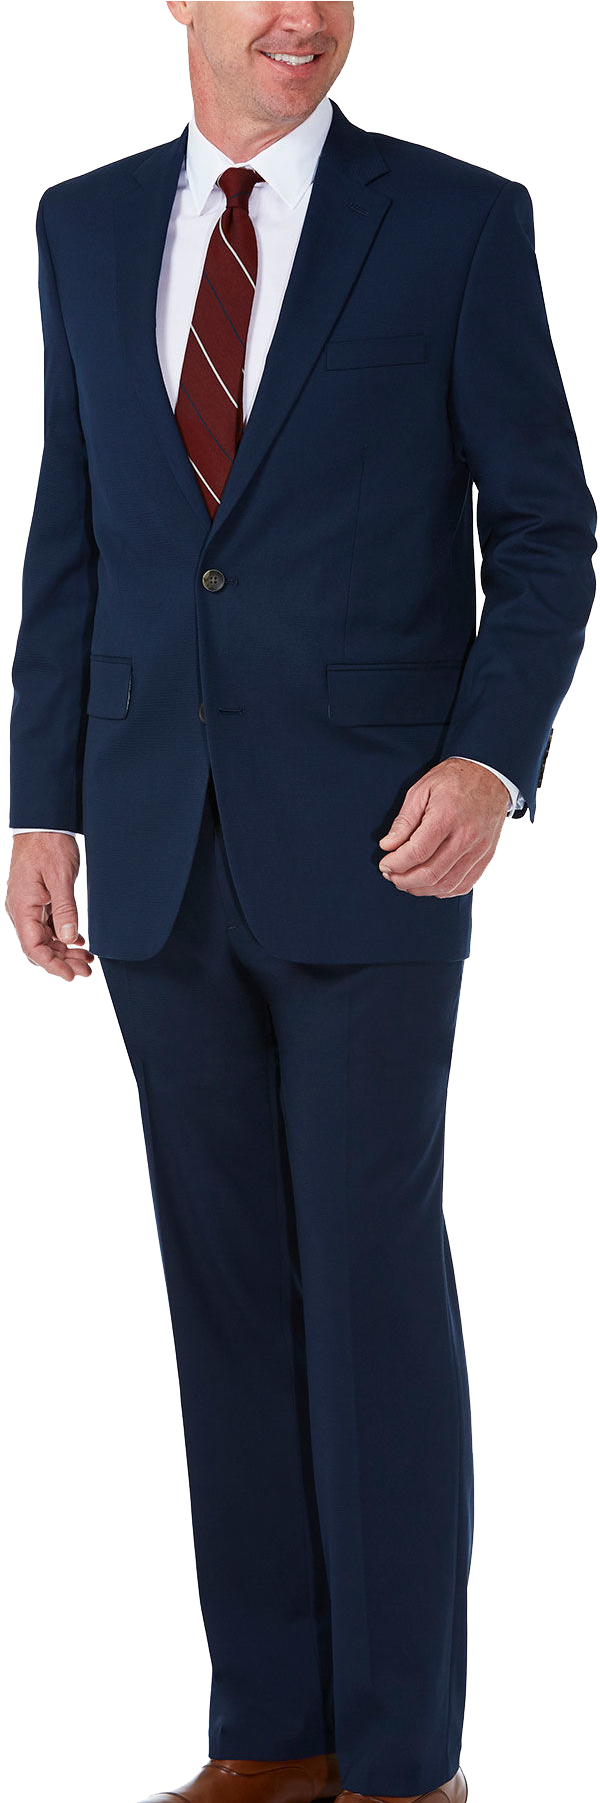 Professional Manin Navy Suit PNG